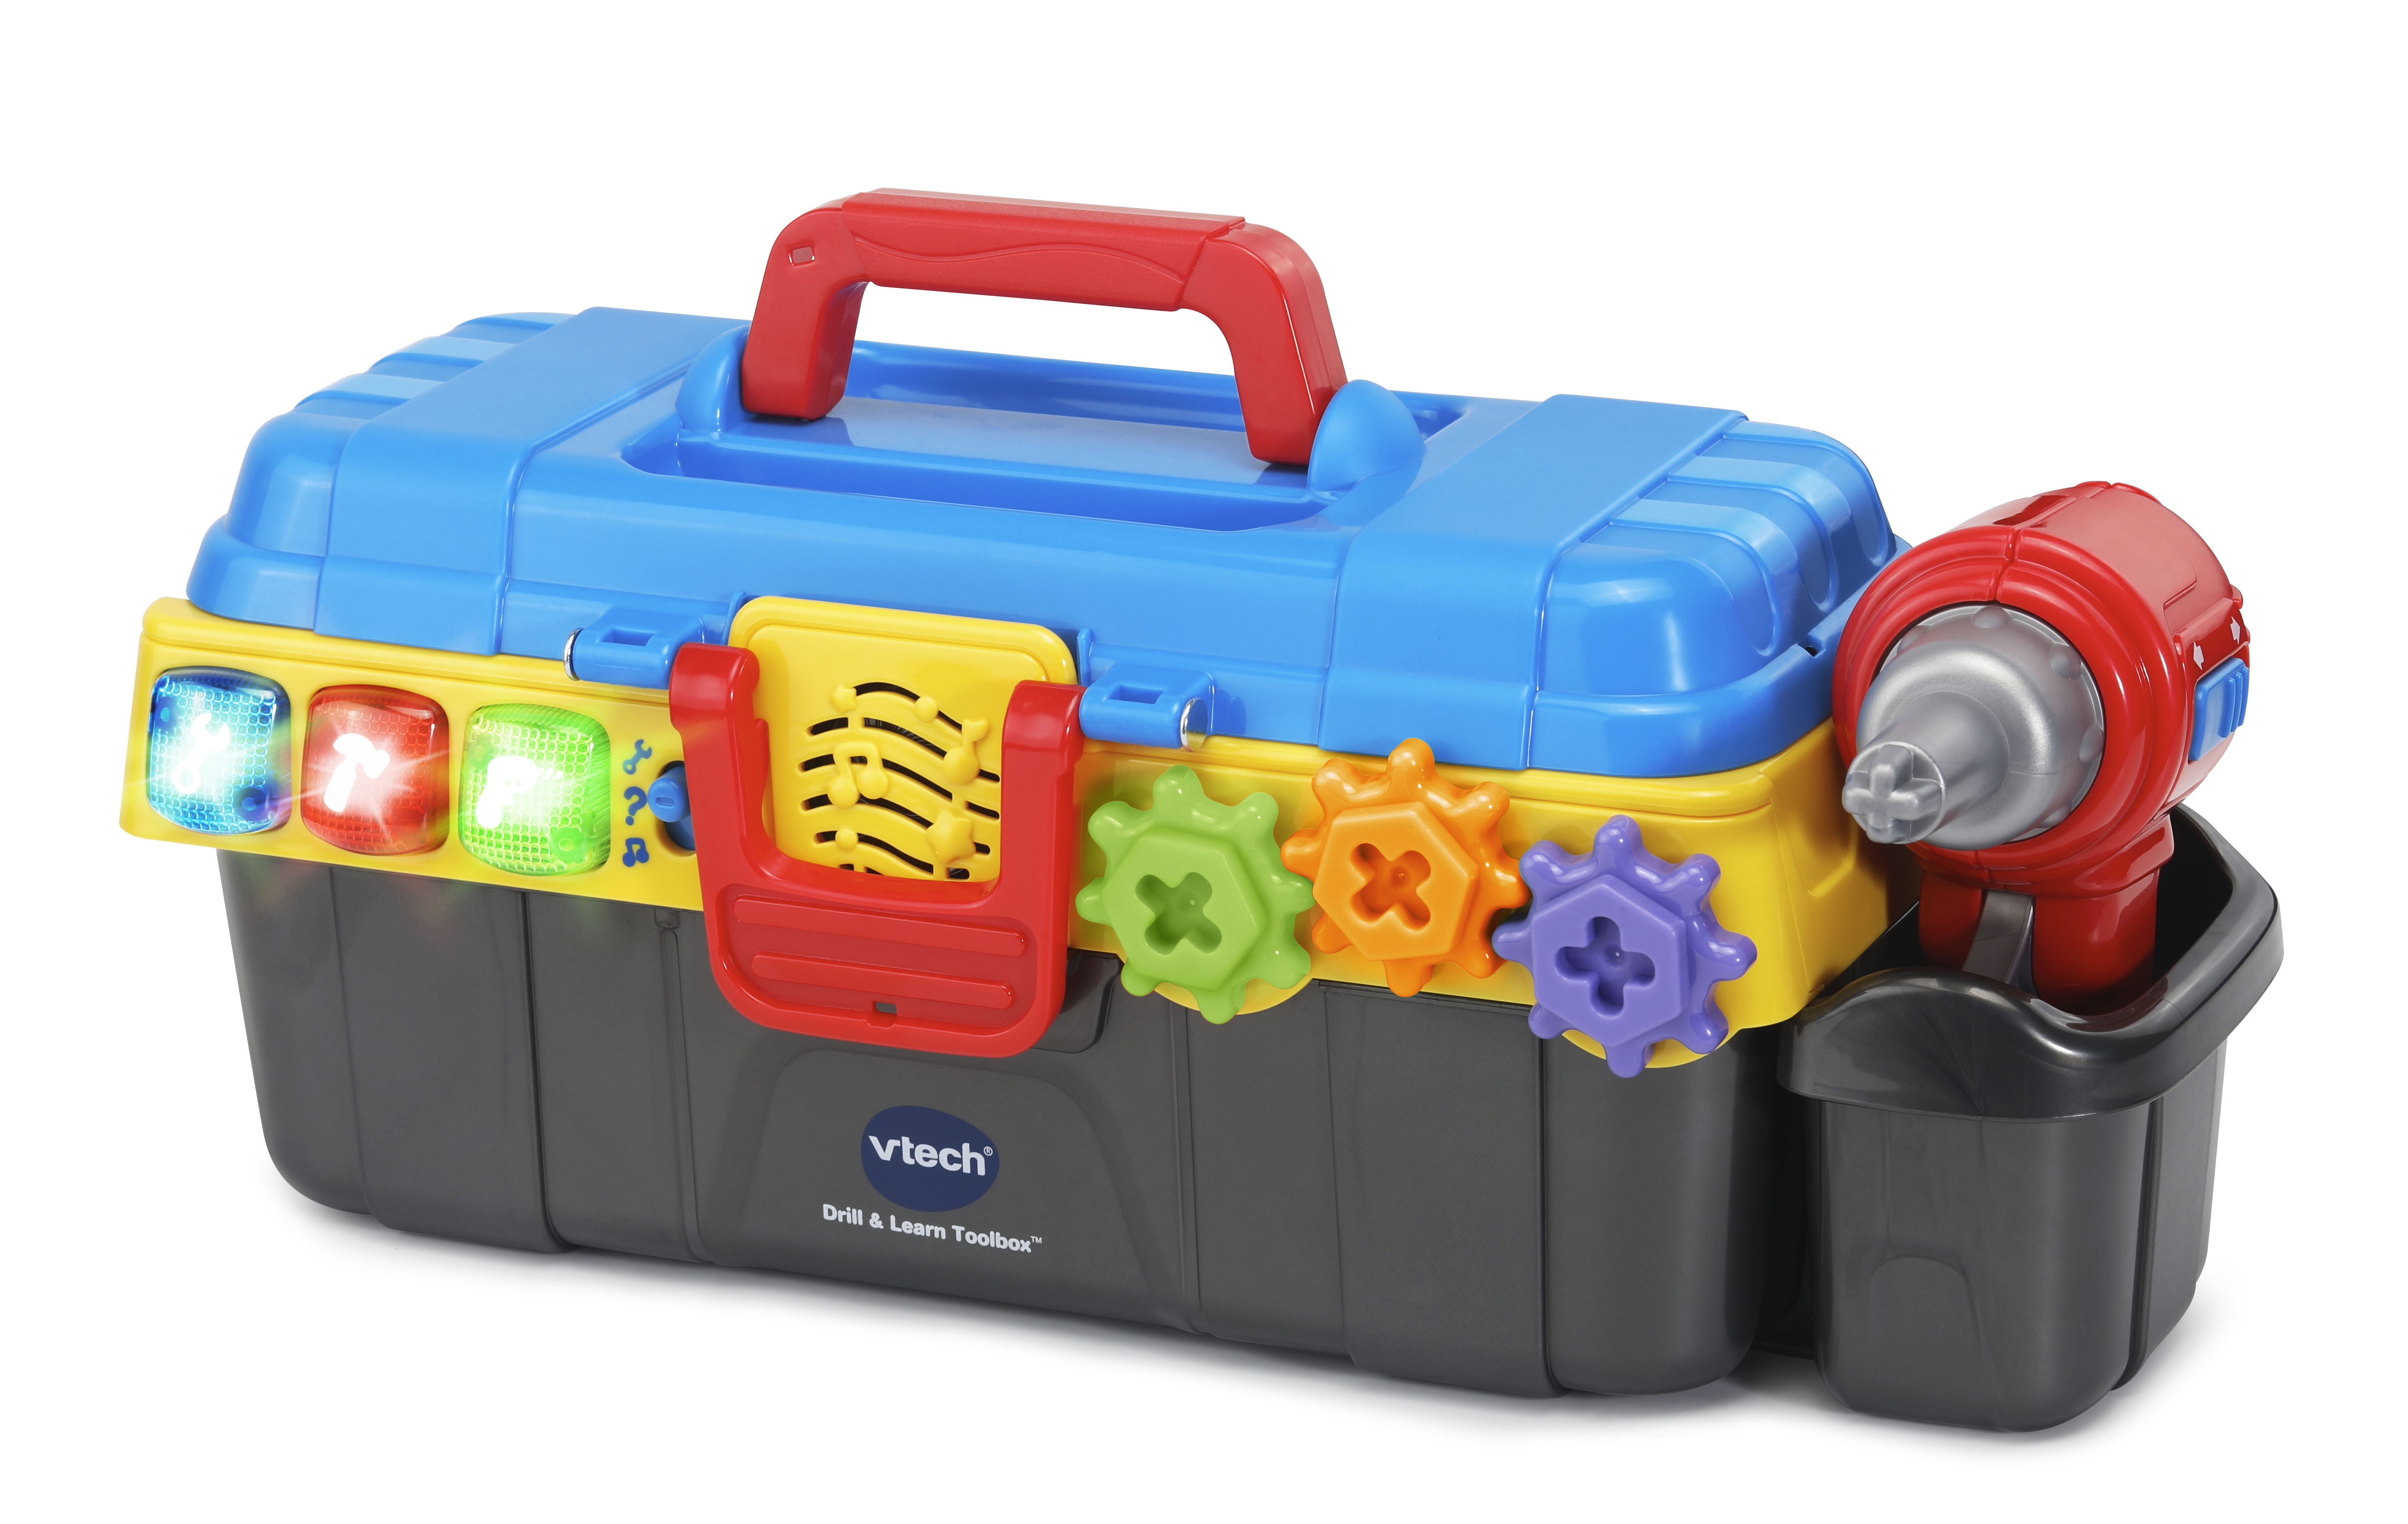 vtech drill and learn toolbox